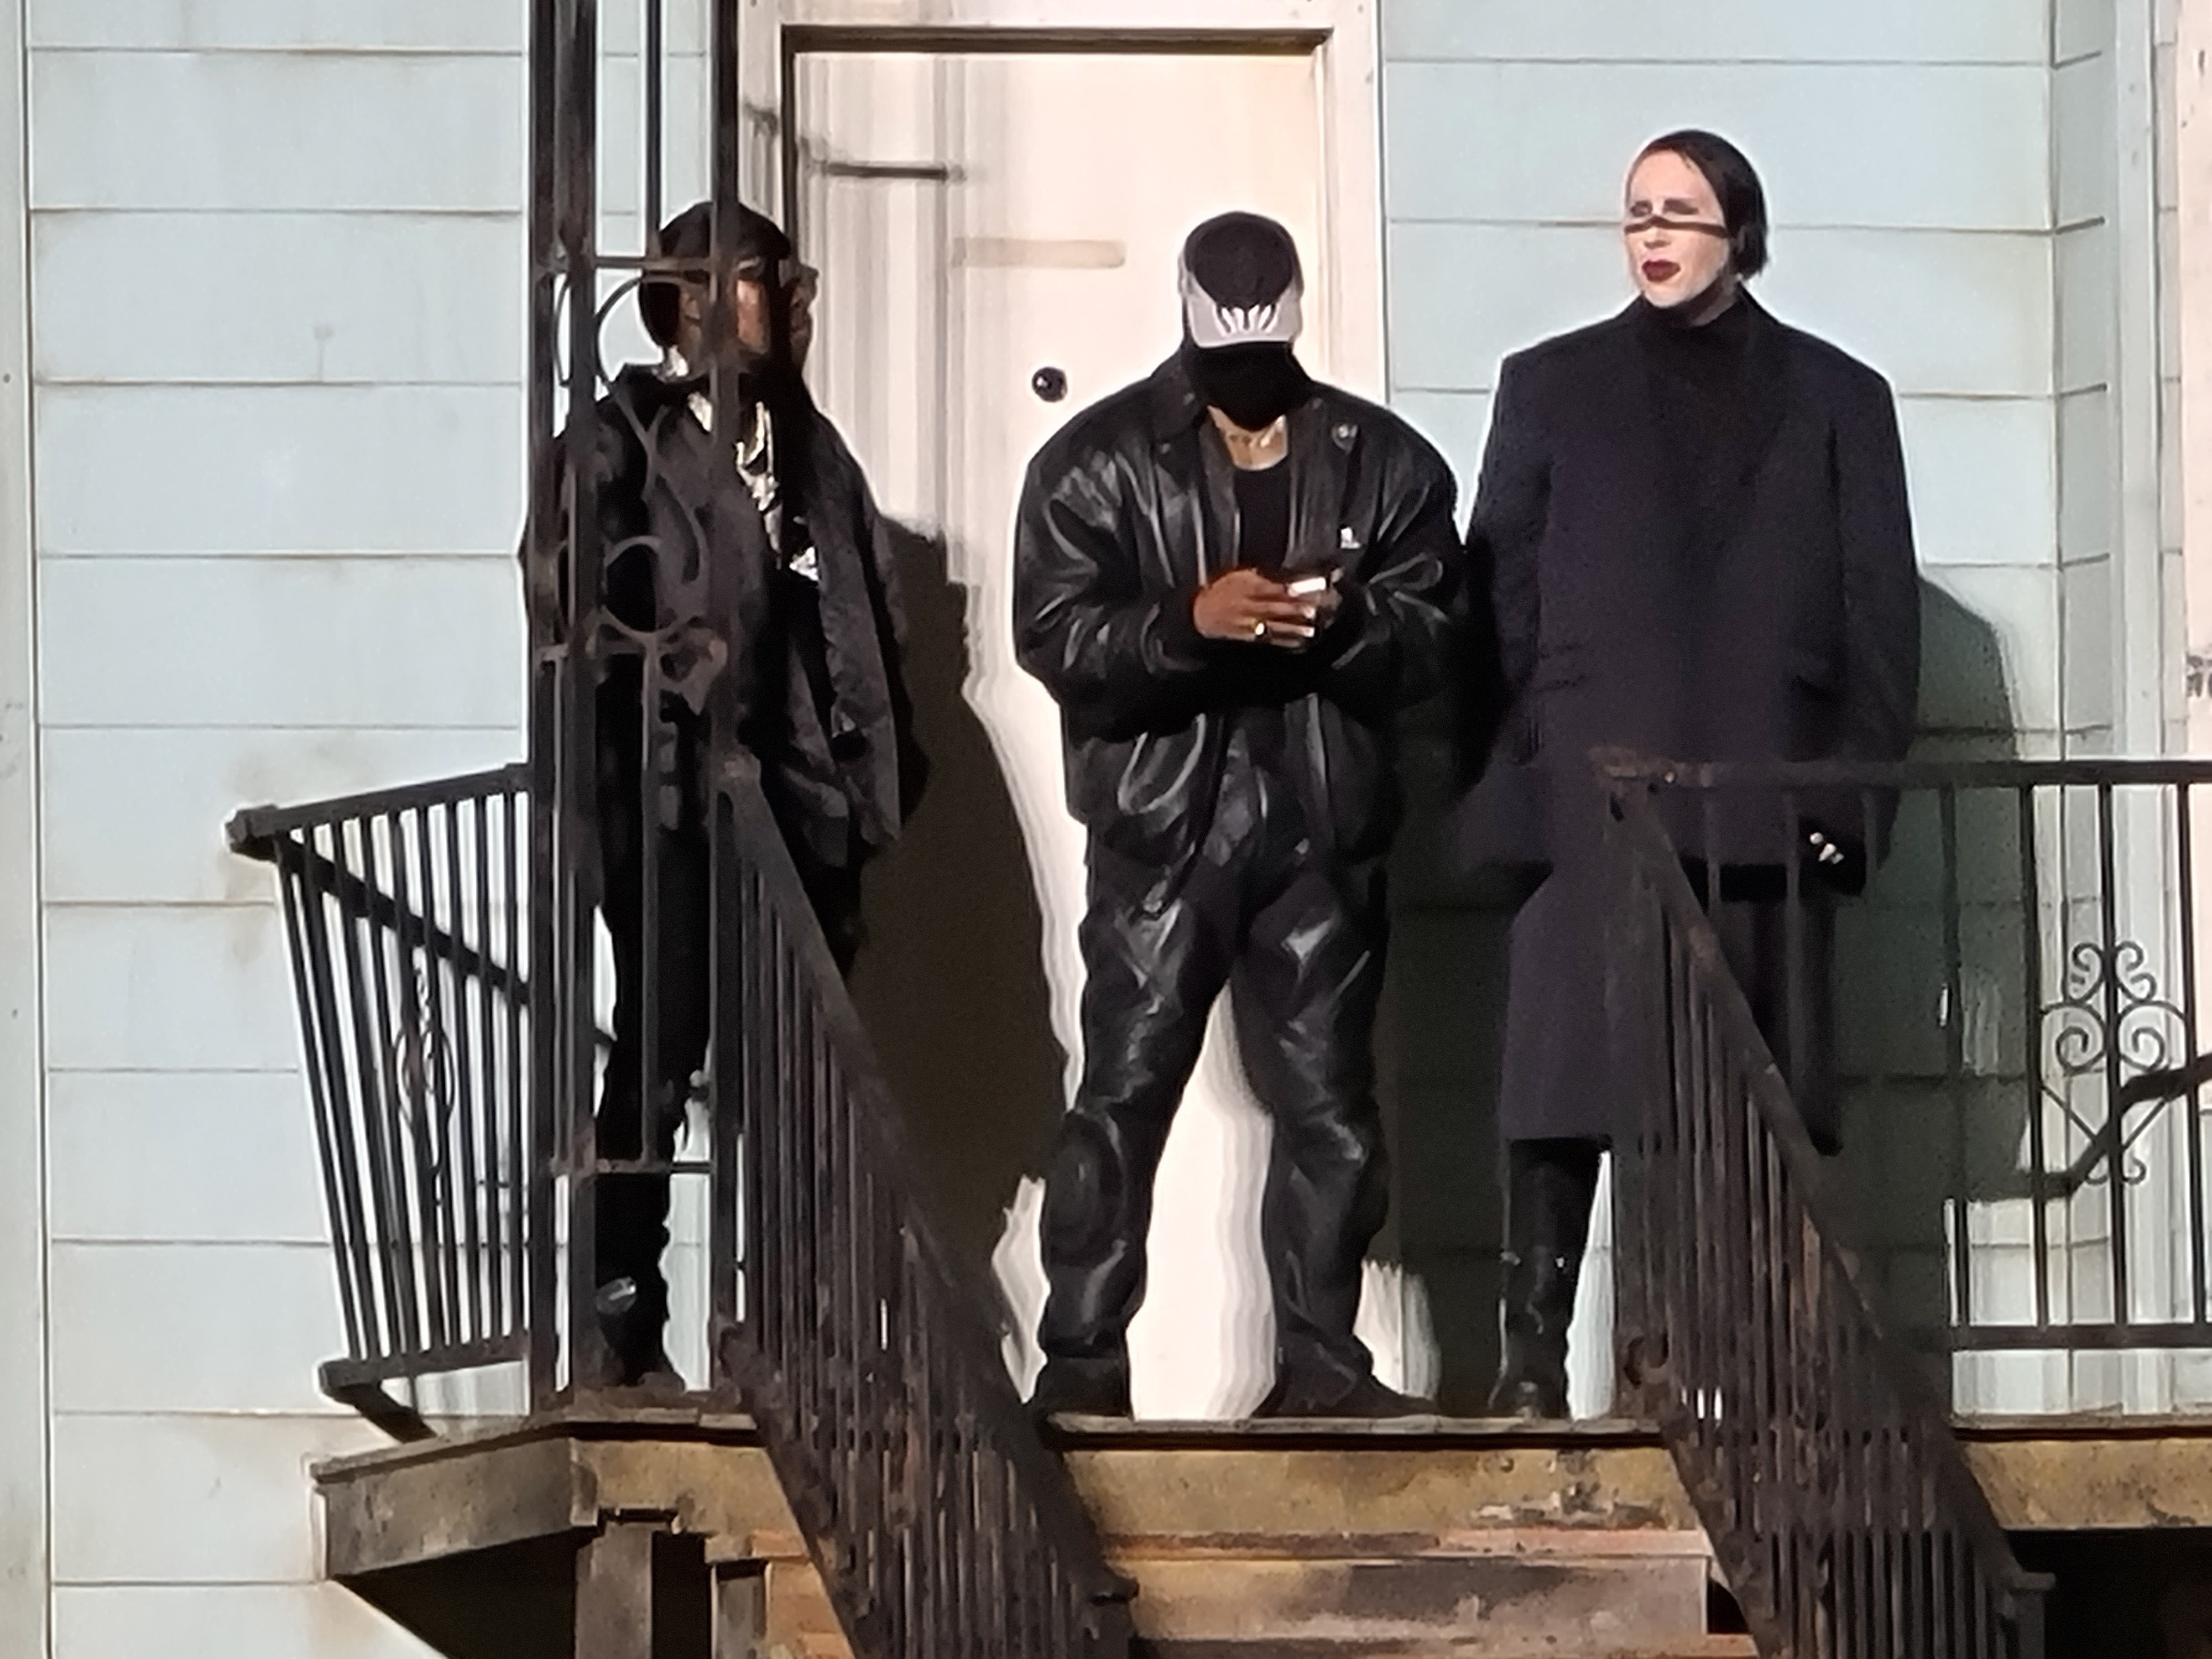 From left to right: DaBaby, Kanye West and Marilyn Manson during the Donda event on August 26, 2021 in Chicago, Illinois. 